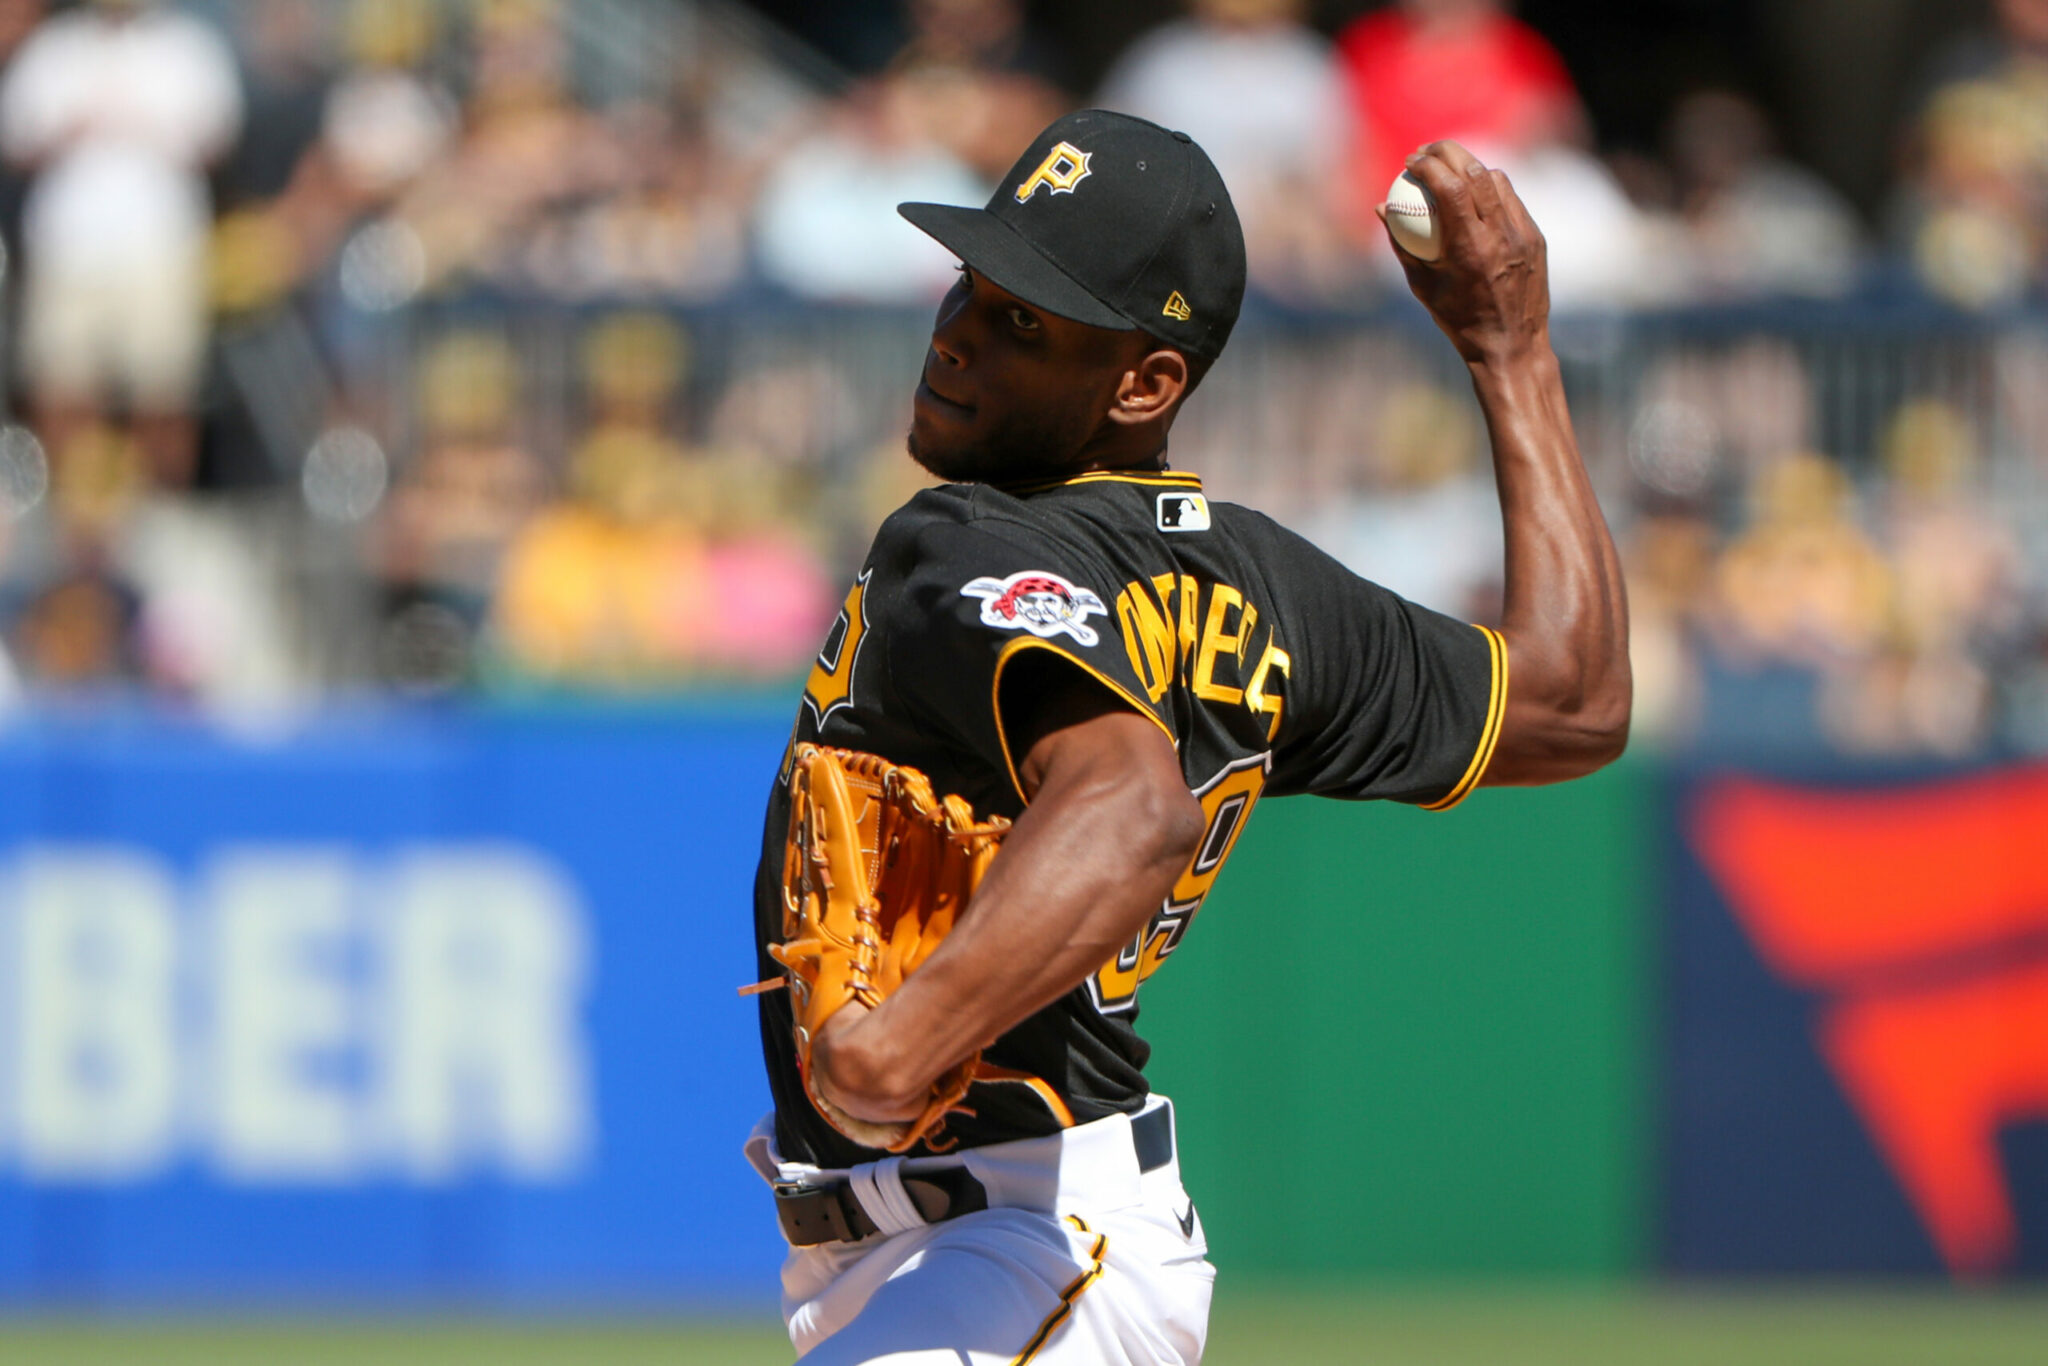 Pirates Prospects Daily: Opening Day is a Fresh Opportunity to Take the Next Step